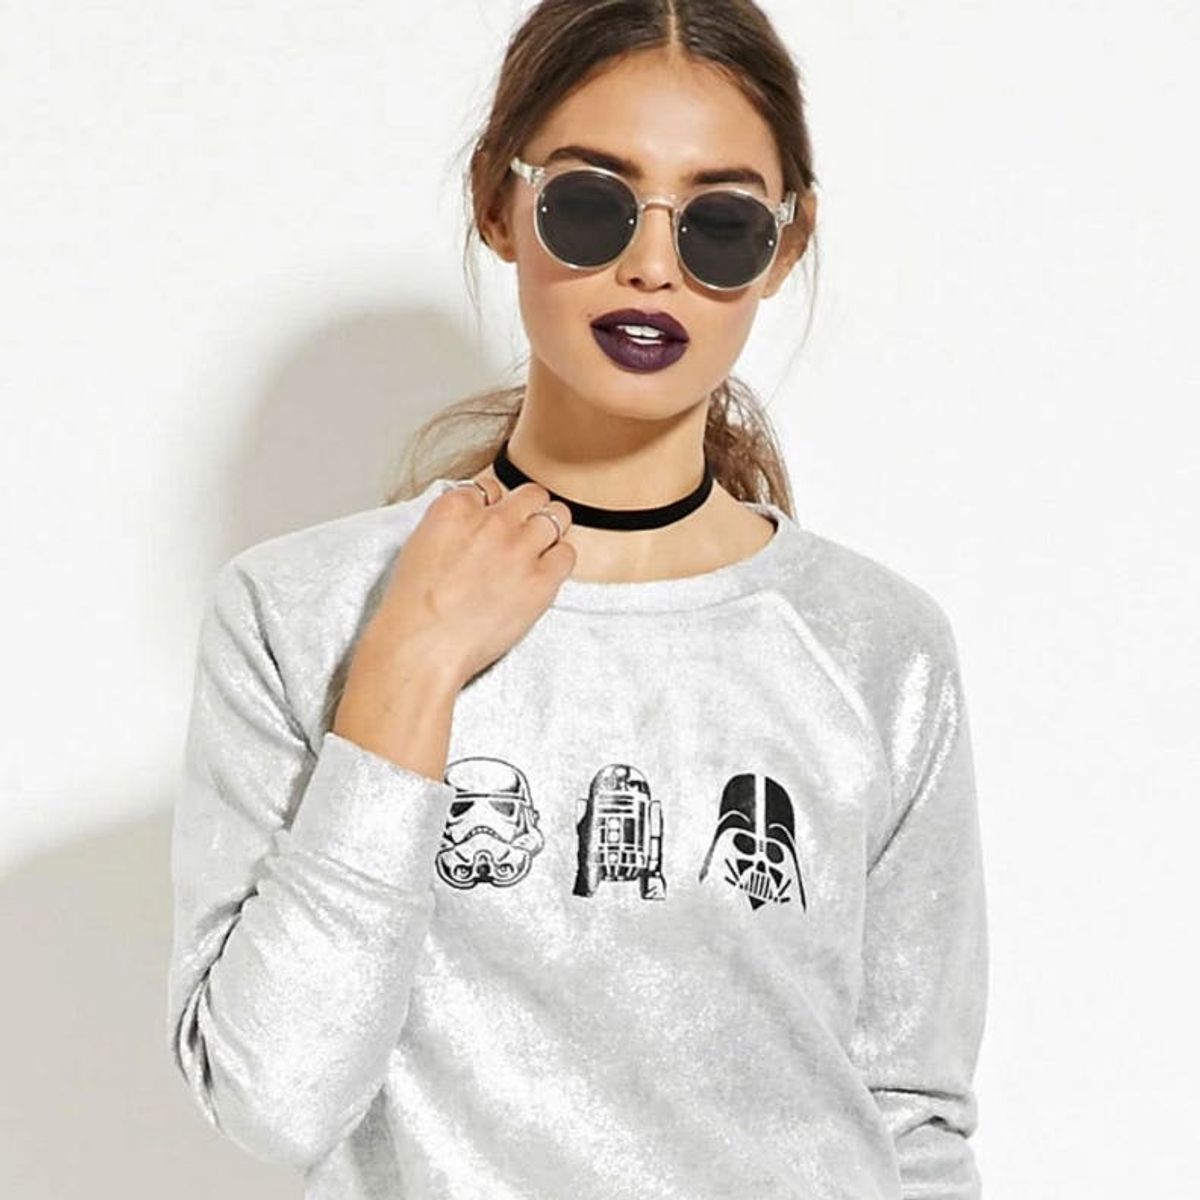 Forever 21 Just Launched a Star Wars Collab for the Fan Who Loves Fashion